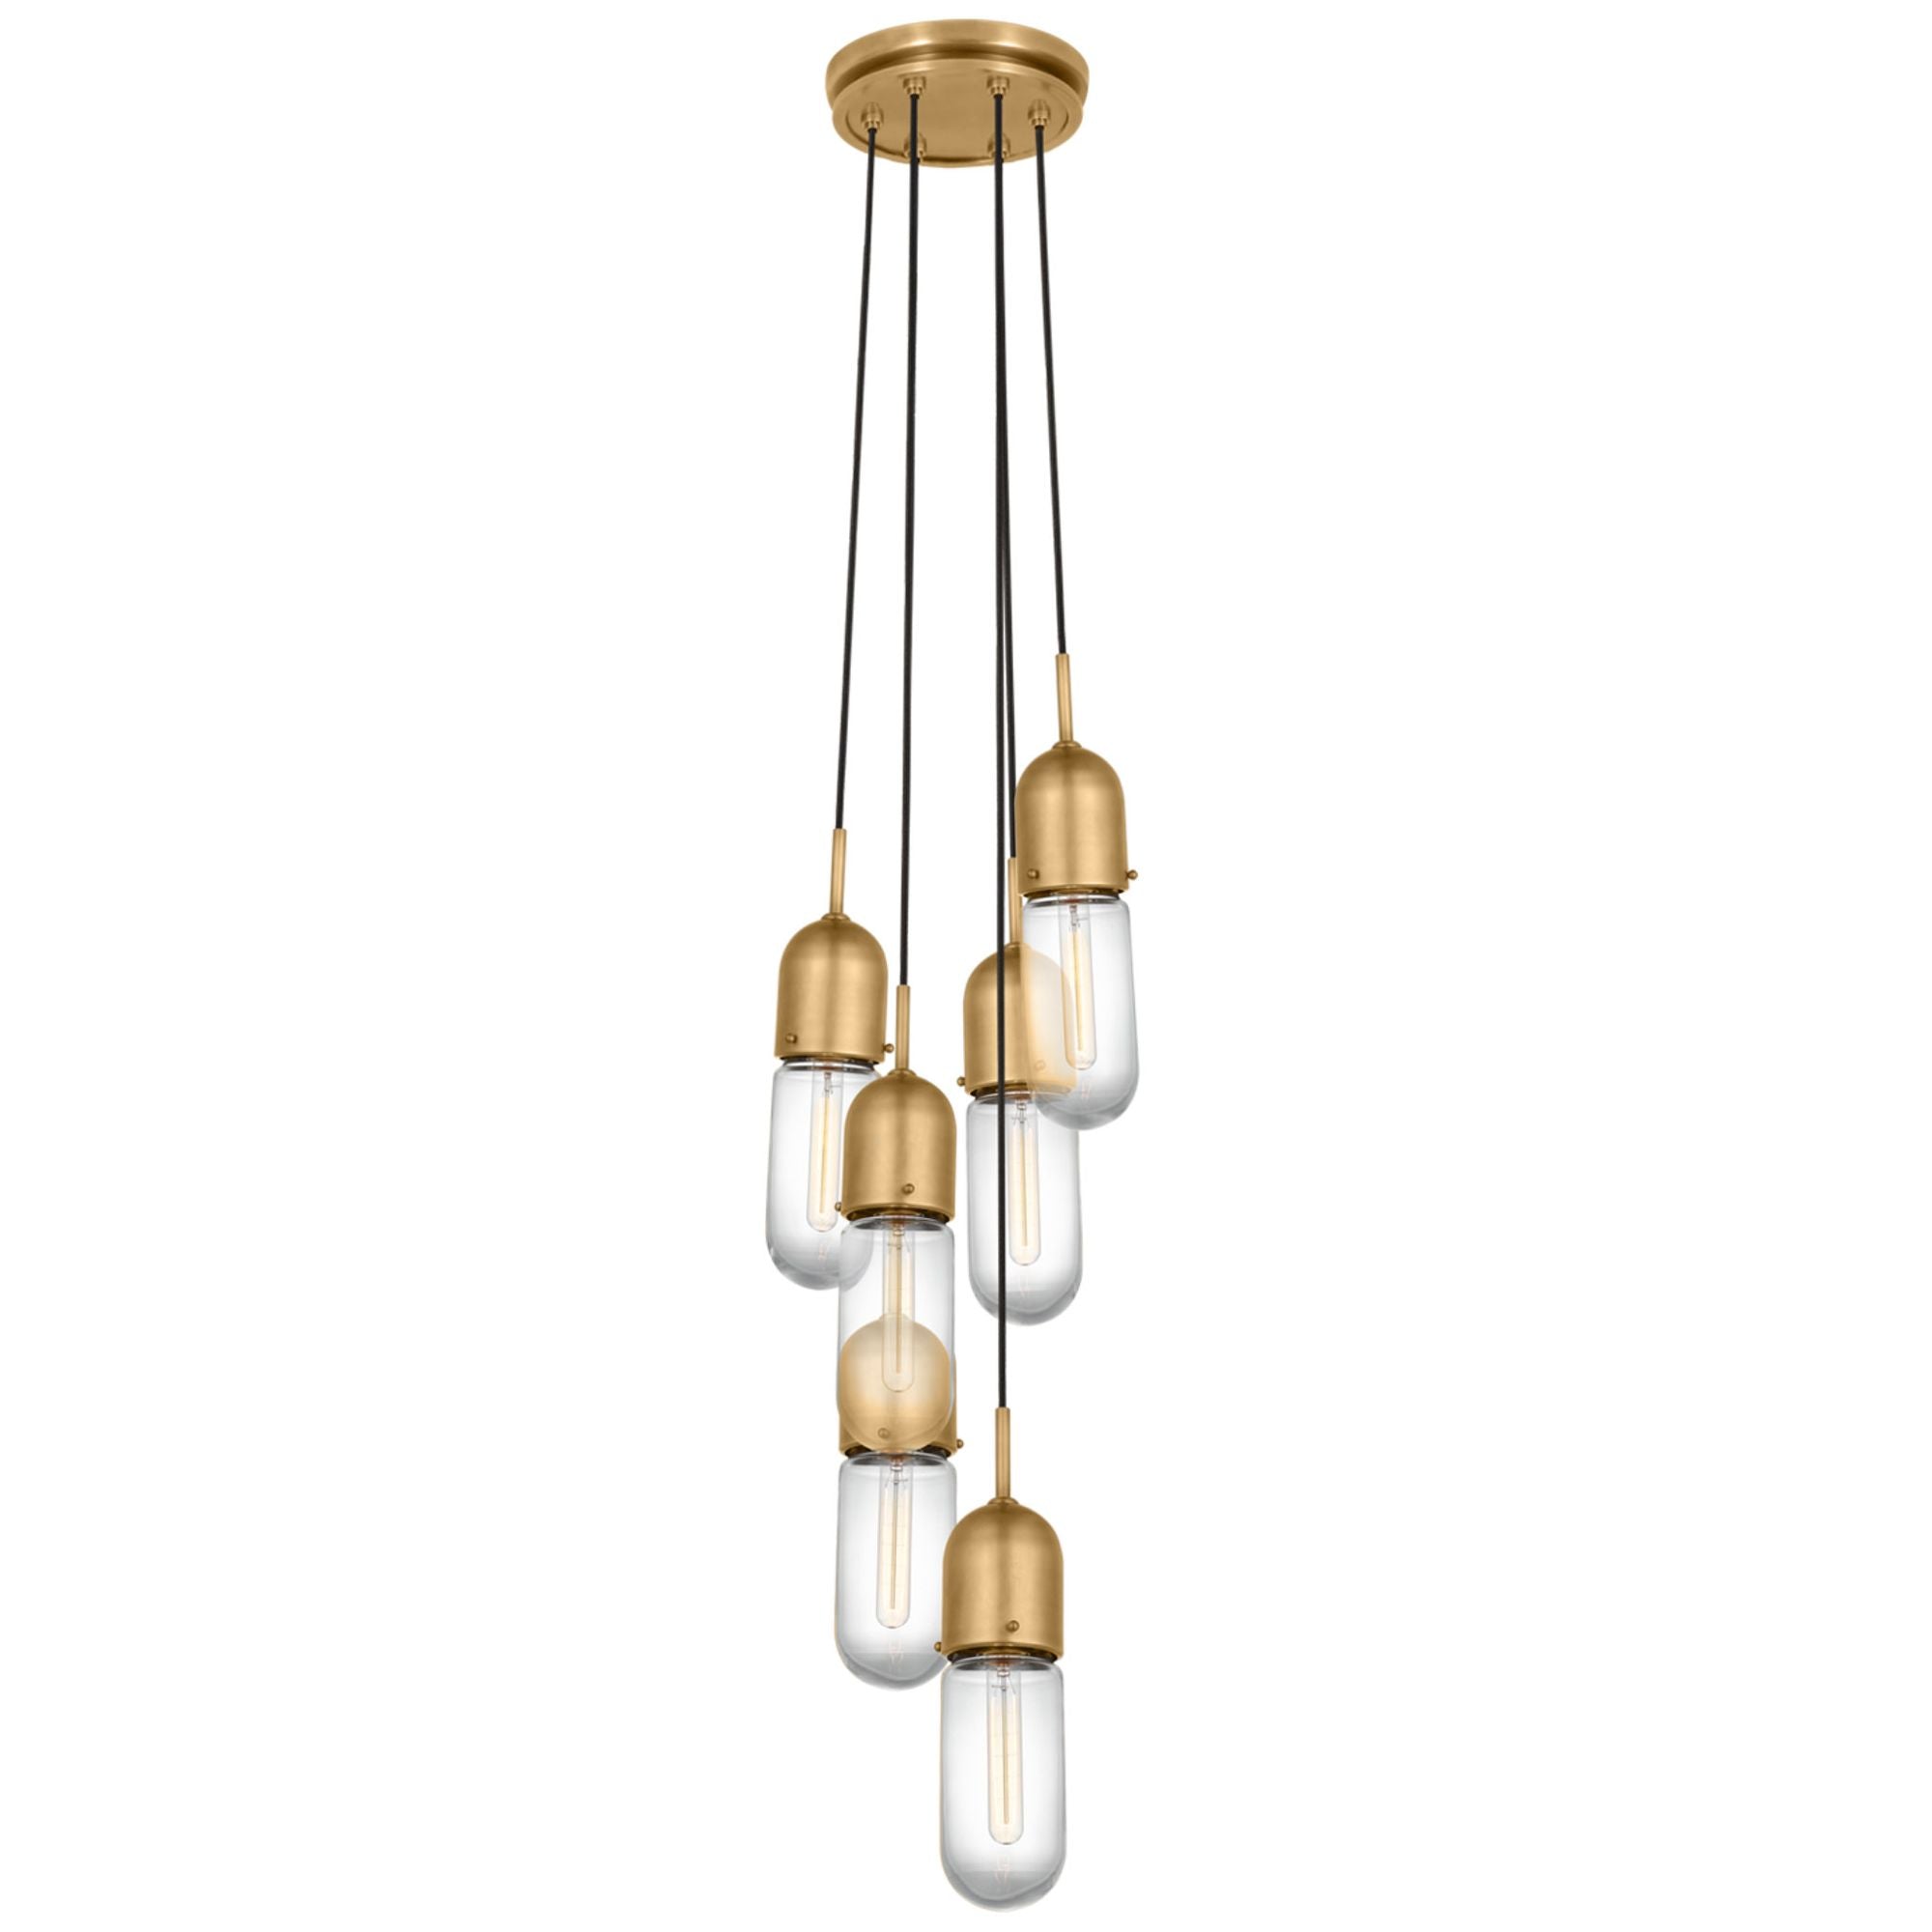 Thomas O'Brien Junio 6-Light Pendant in Hand-Rubbed Antique Brass with Clear Glass